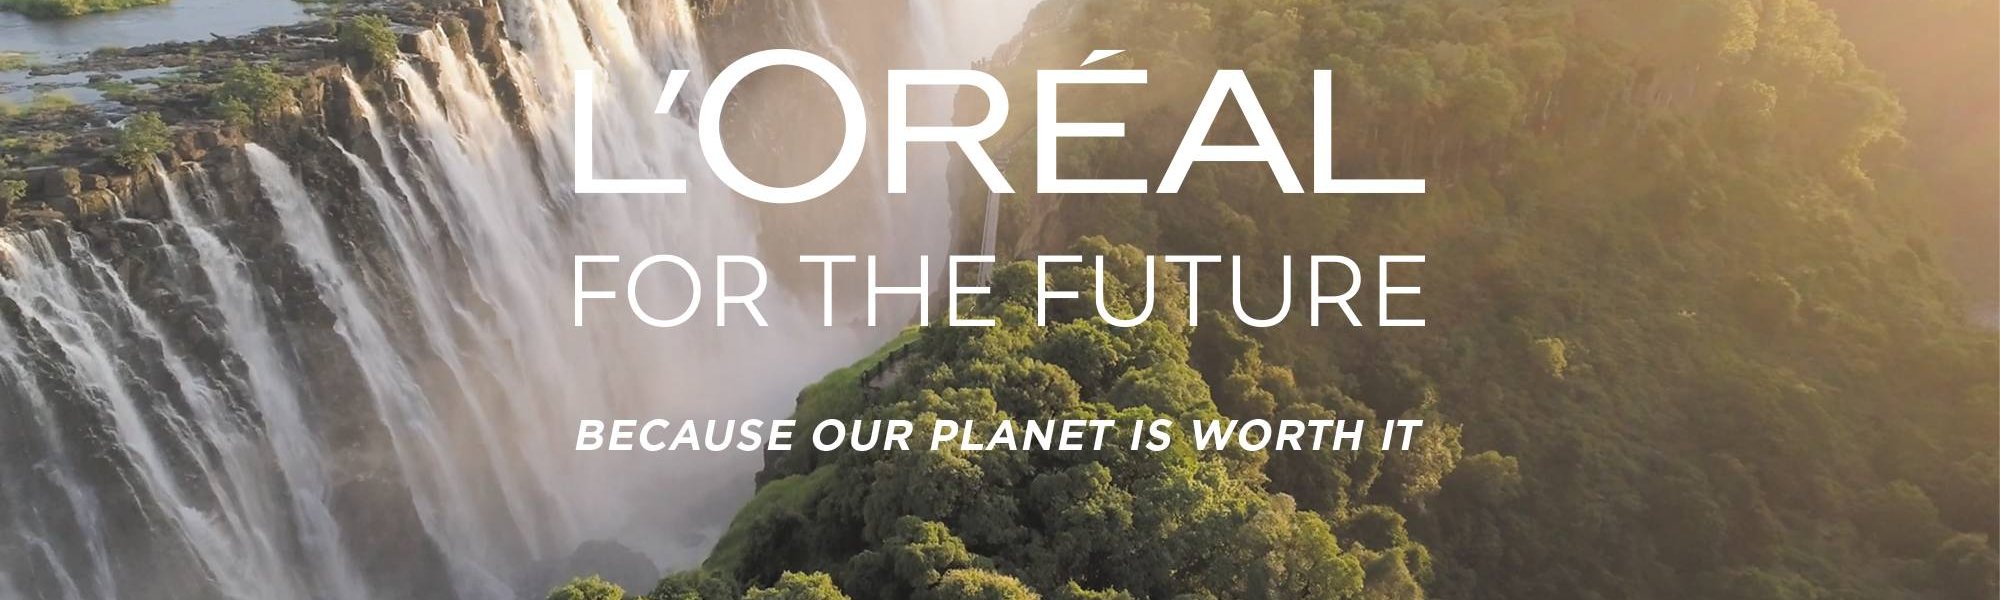 L'Oréal for the future - Because our planet is worth it